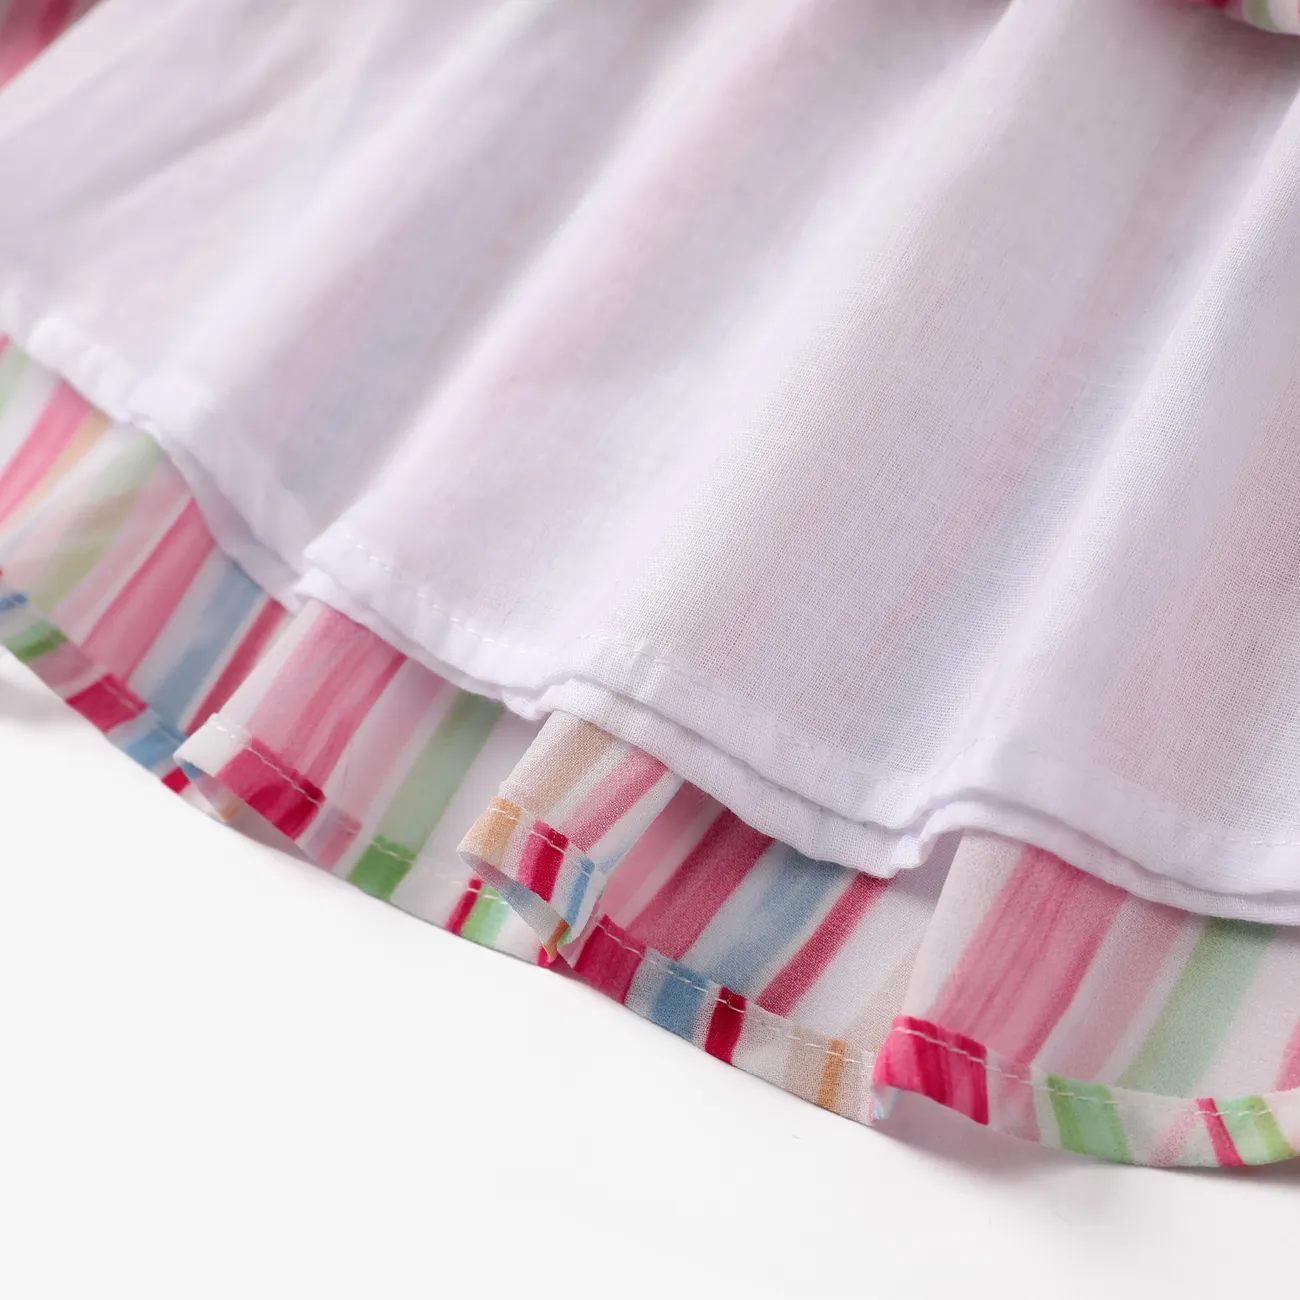 Baby Girl 2pcs Letter Print Romper and Striped Skirts Set PINK-1 big image 1